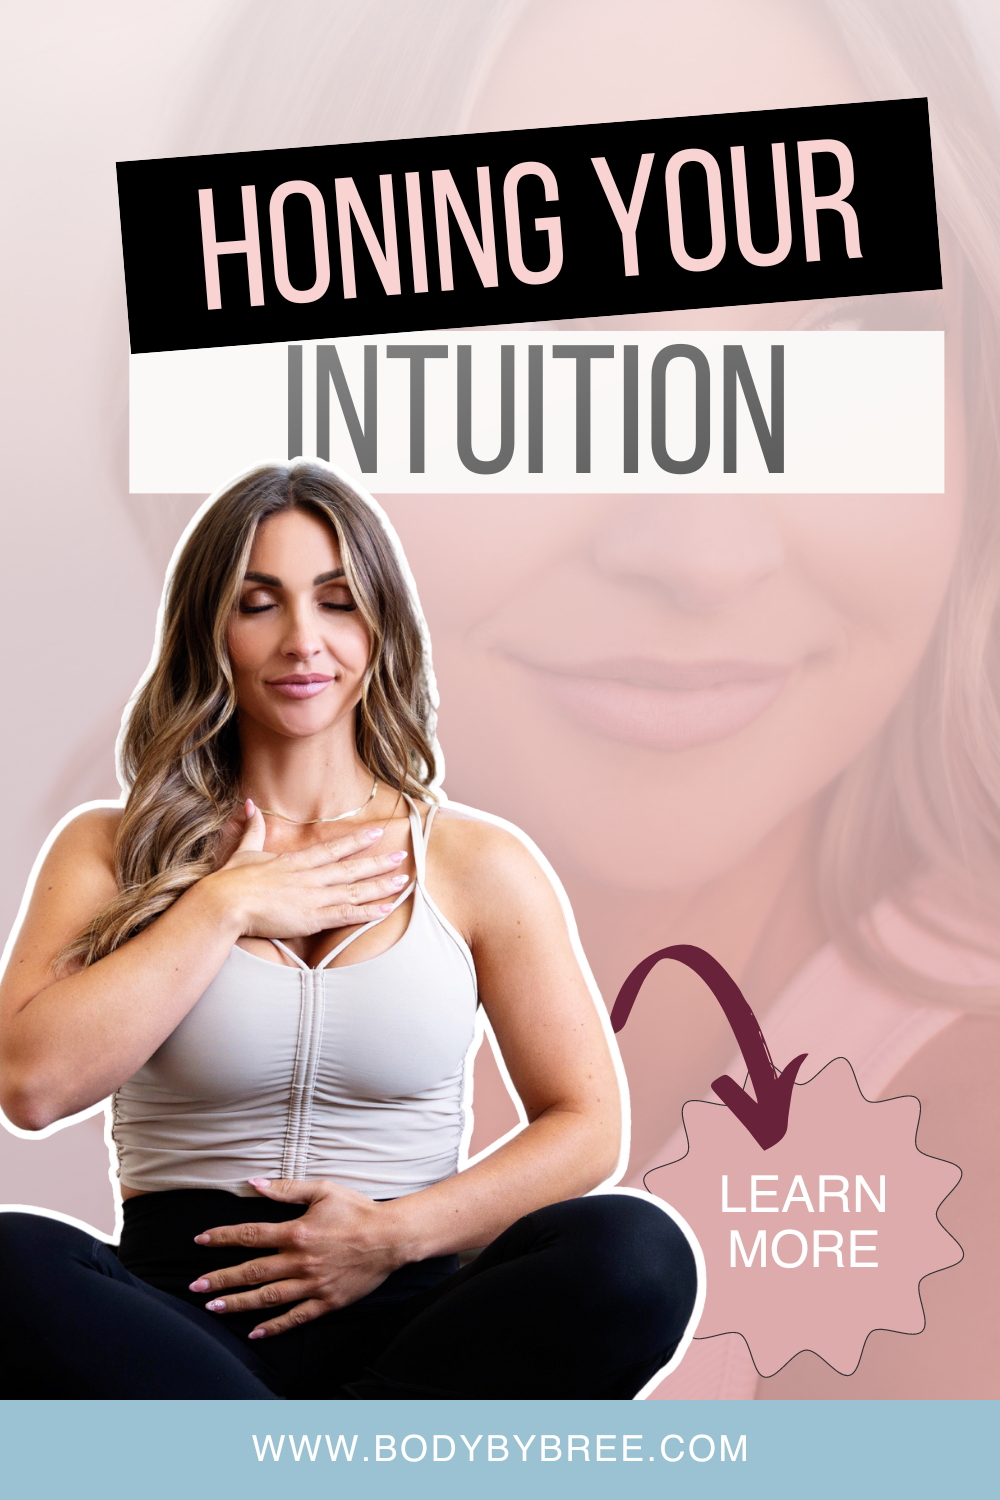 HONING YOUR INTUITION